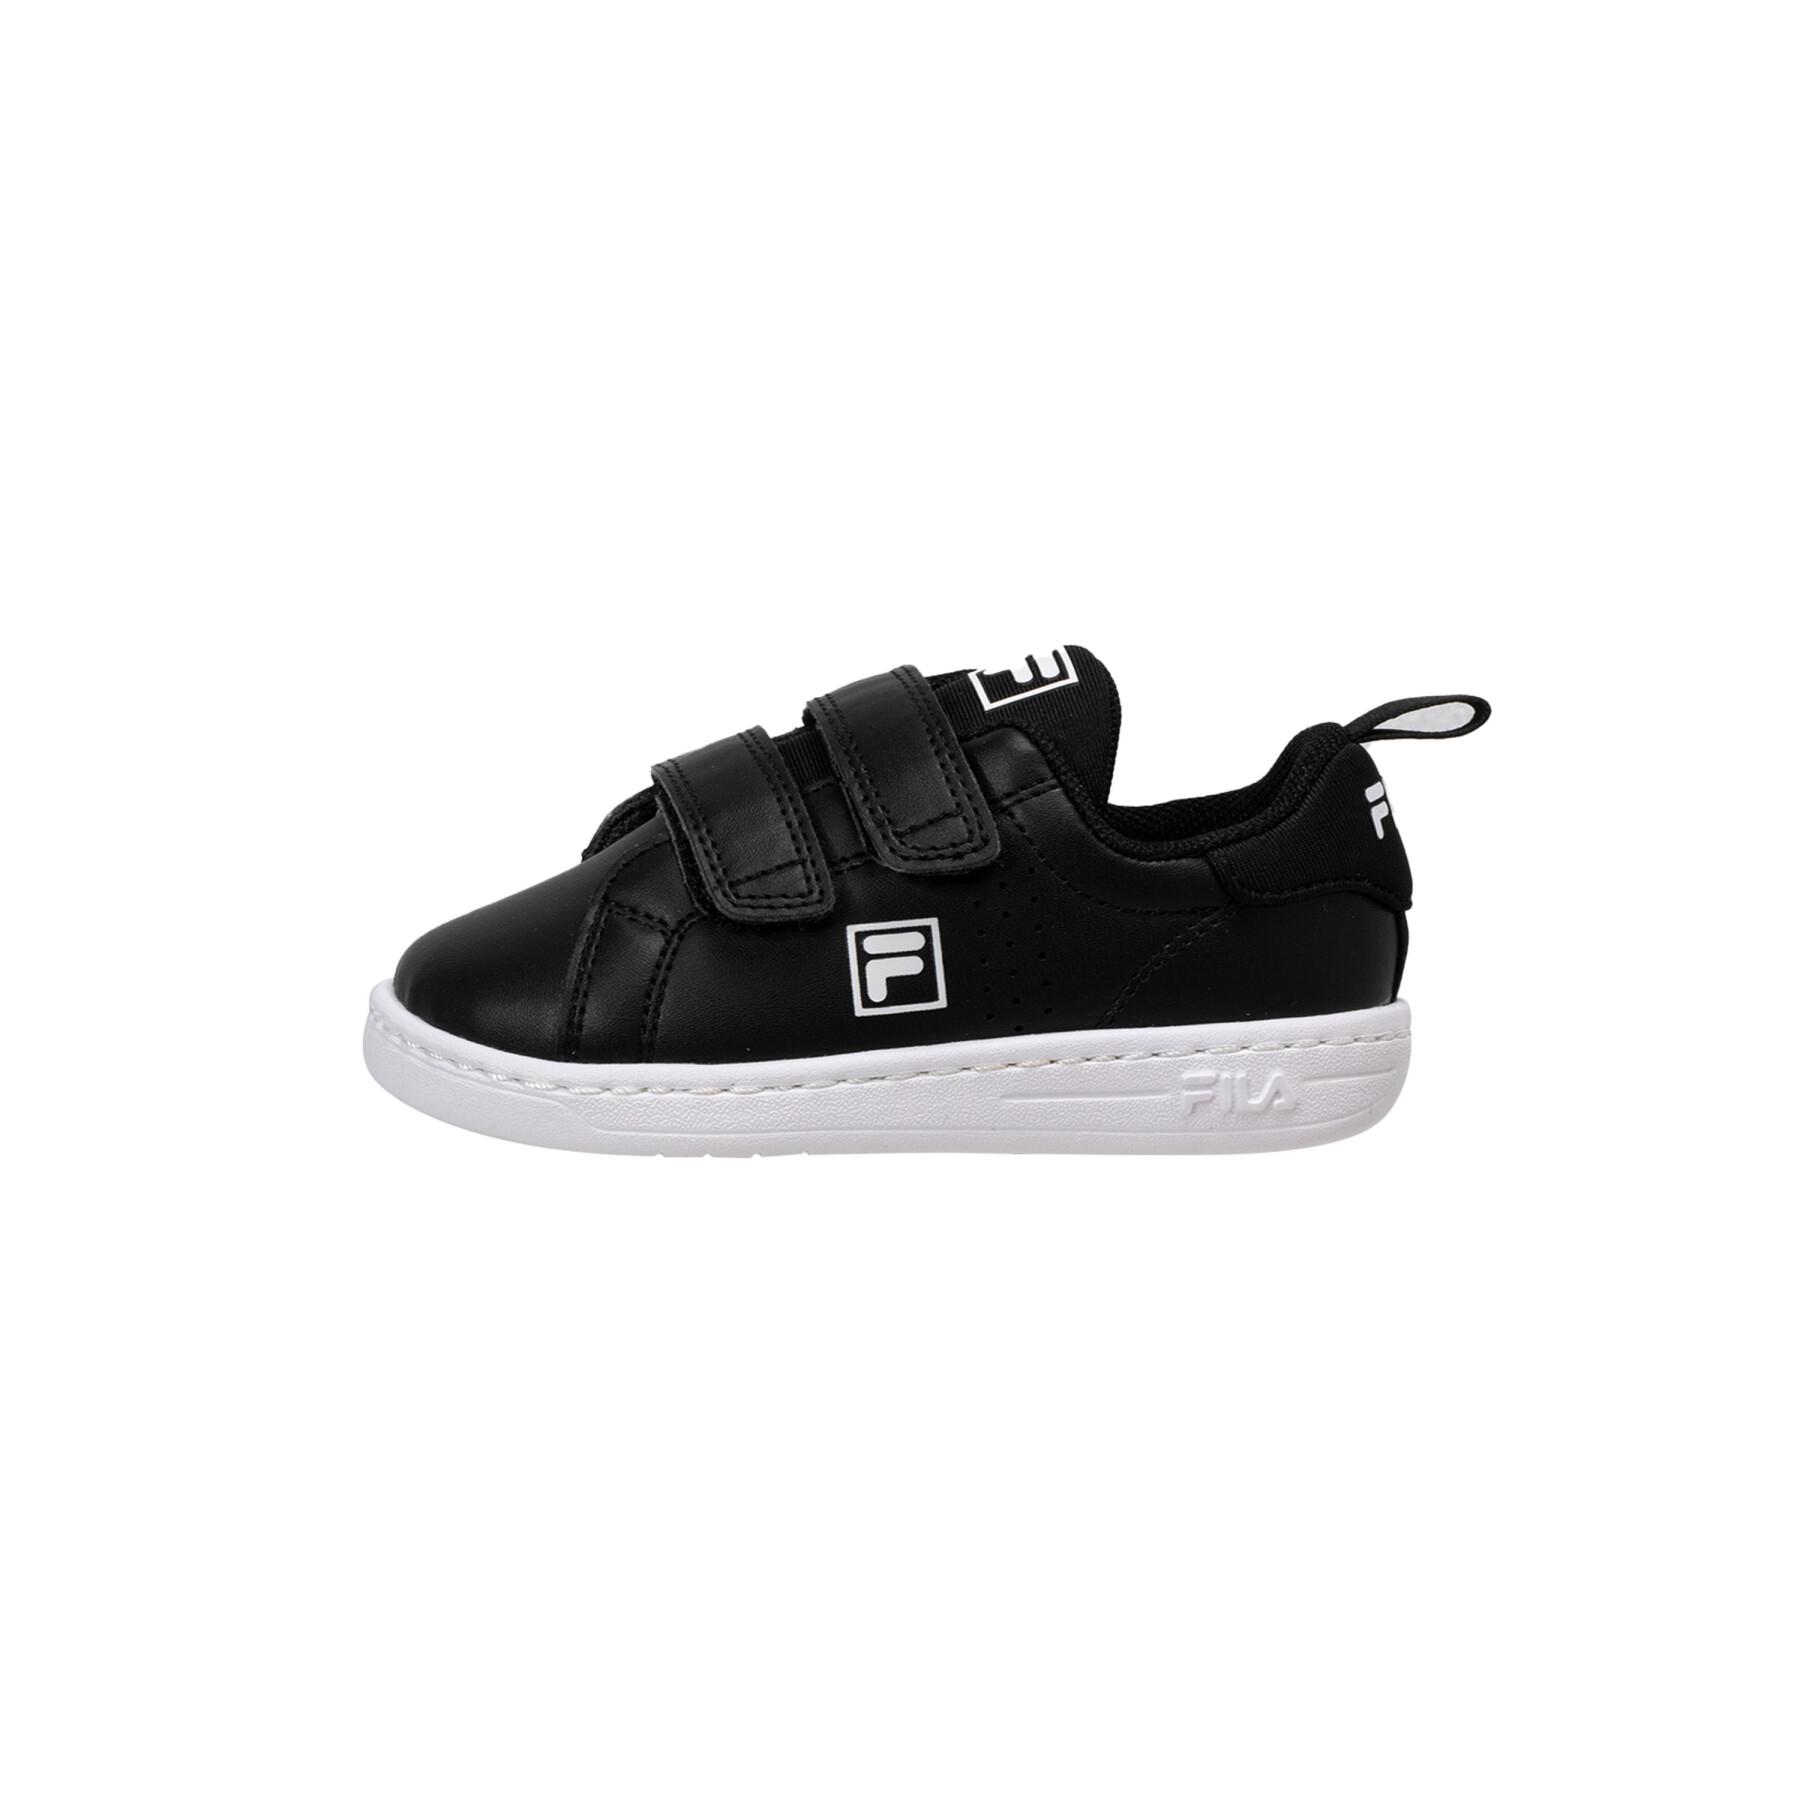 Fila Sneakers 2 Crosscourt NT - baby Baby A sneakers Velcro Baby - Baby - Shoes